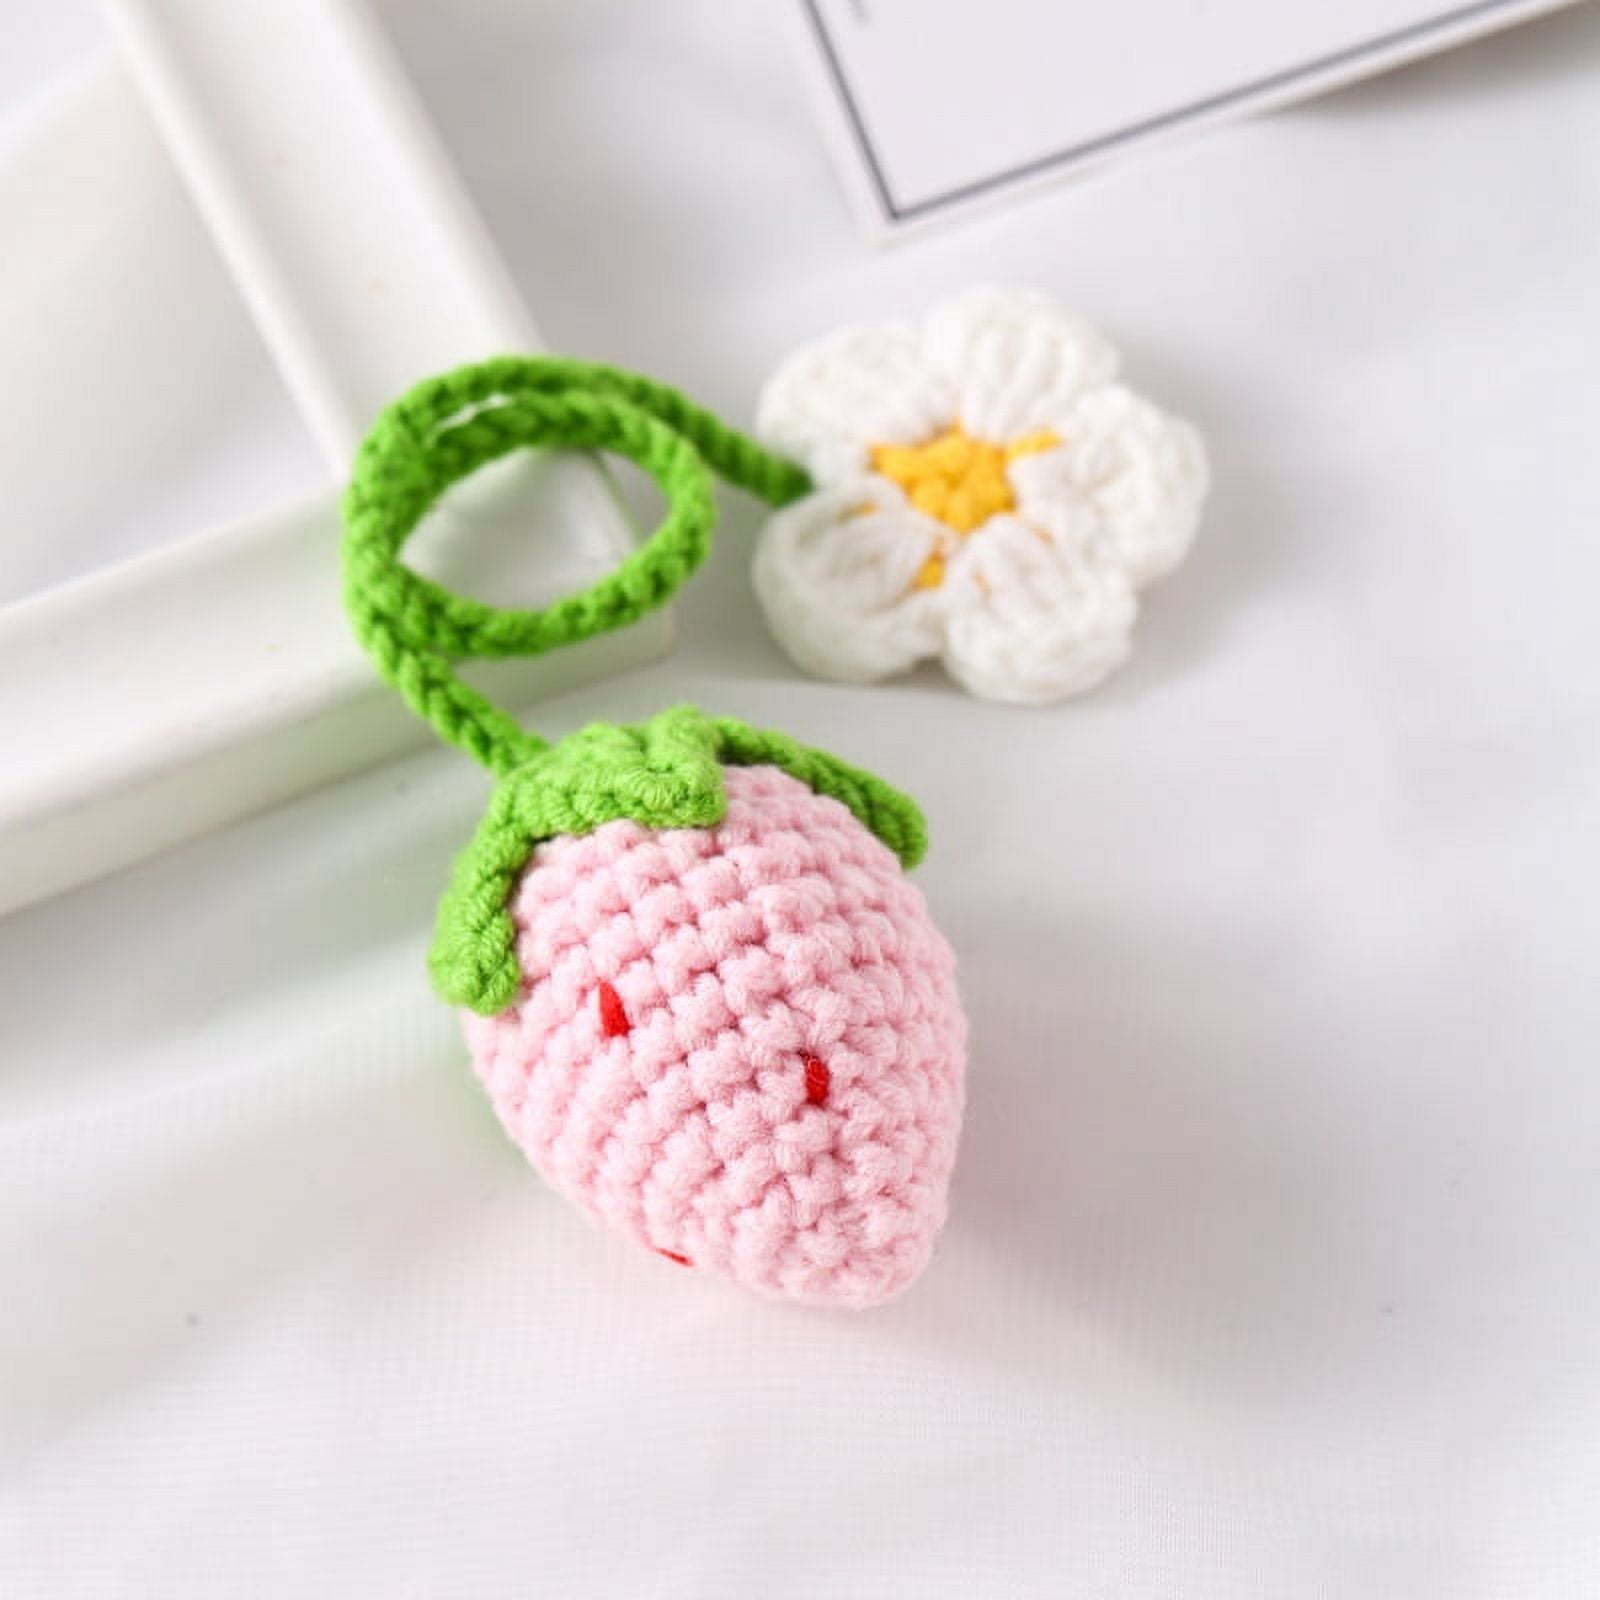 TIESOME 2 Pcs Car Mirror Charms, Cute Strawberry Car Hanging Ornament for Car  Rearview Mirror Decor Crochet Car Mirror Hanging Charms Accessories Flower  Hand Knitted Strawberry Car Decor for Women : 